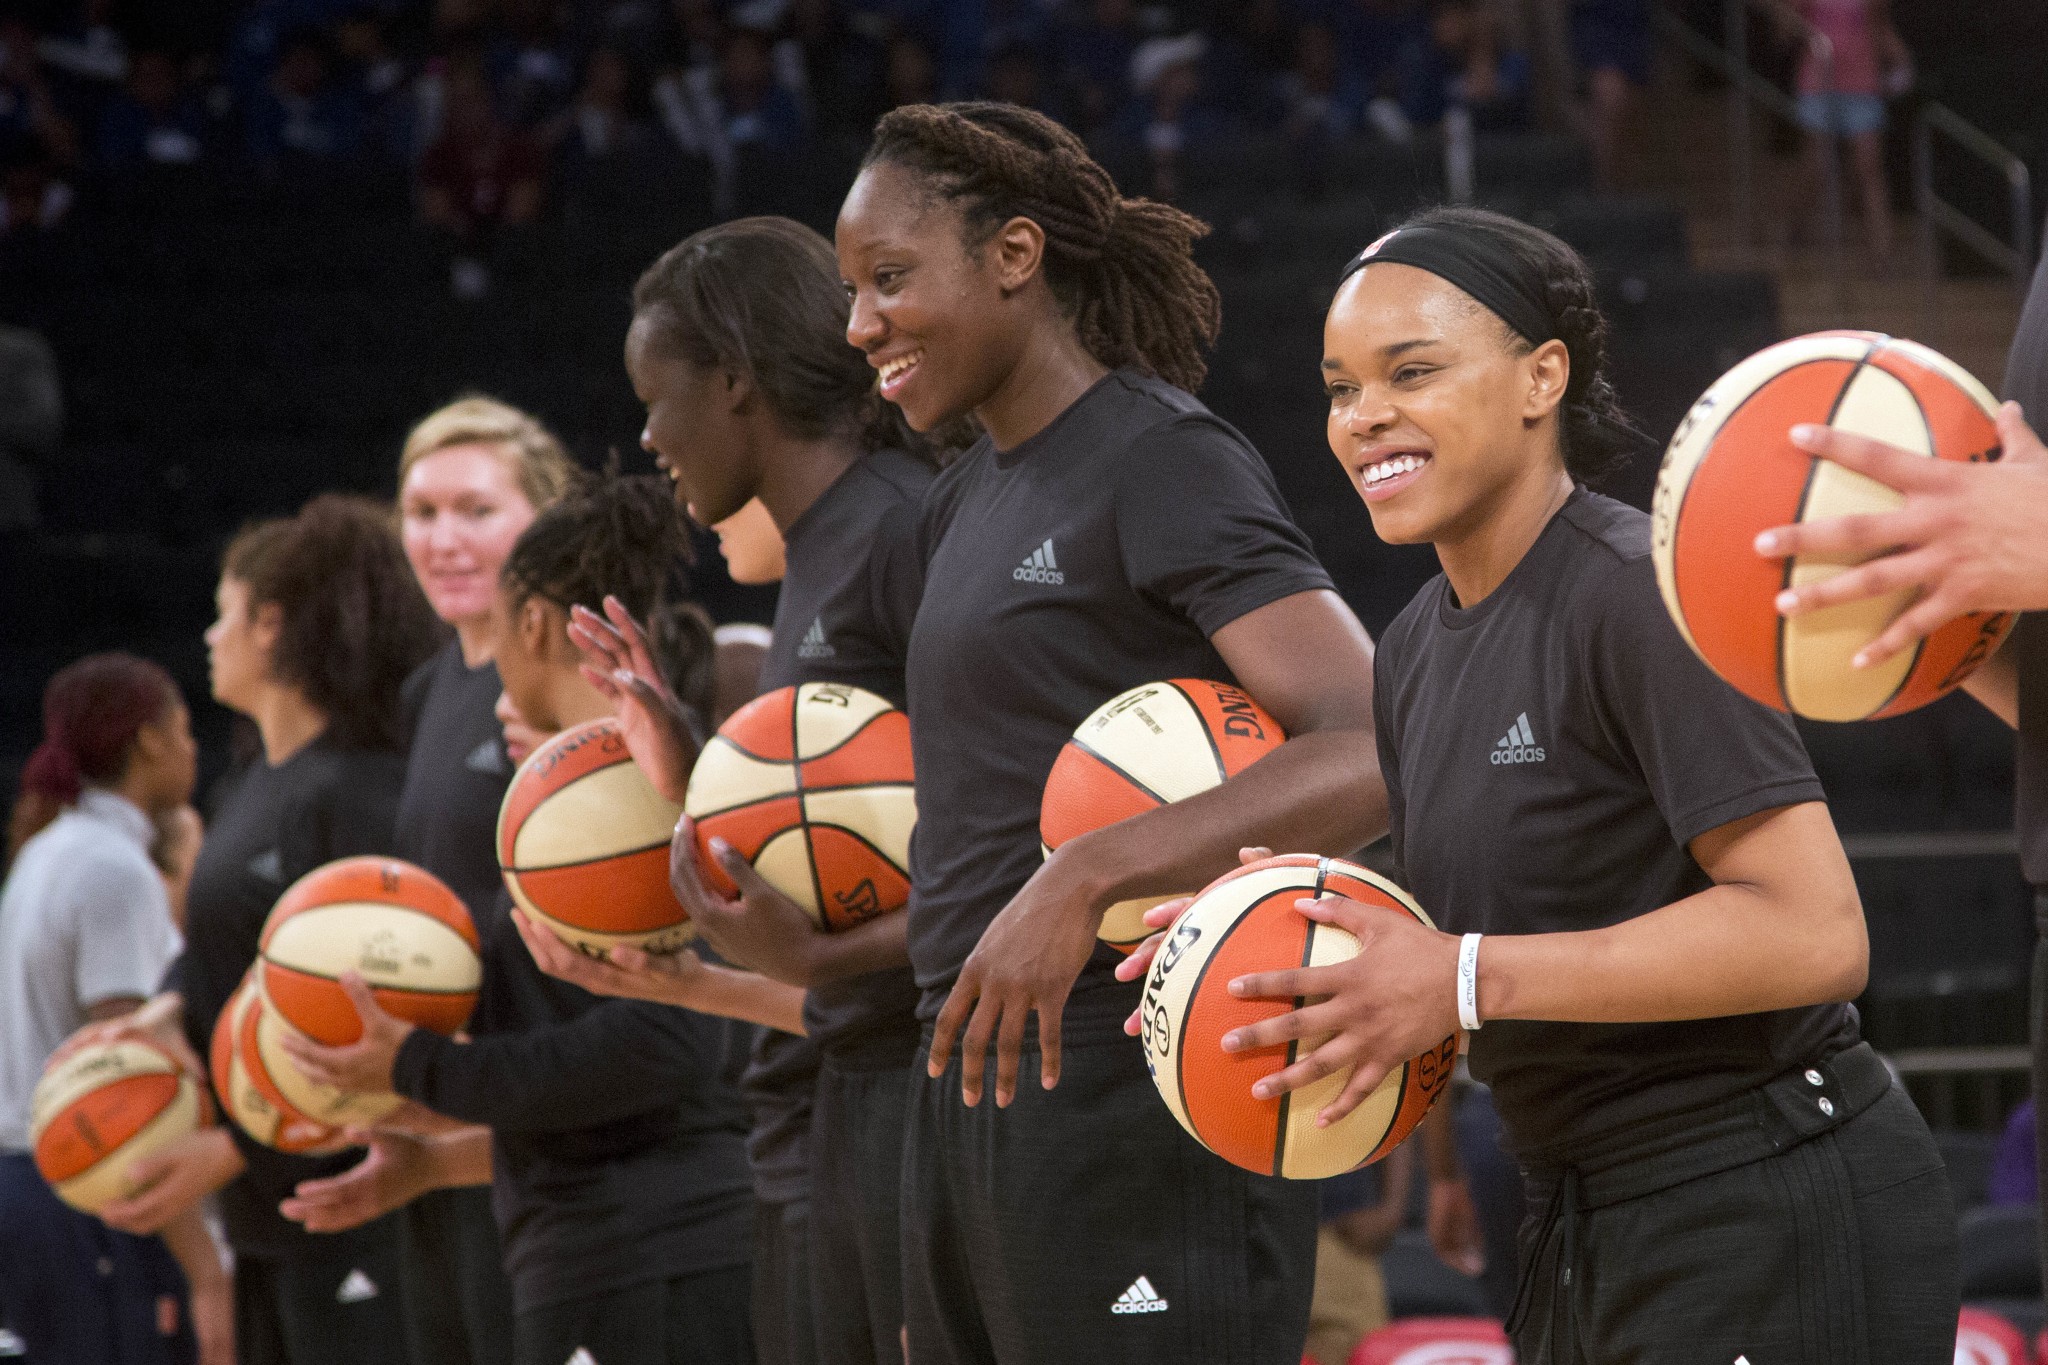 Members of the New York Liberty await the start of a game against the Atlanta Dream on July 13, 2016. (AP/Mark Lennihan, File)